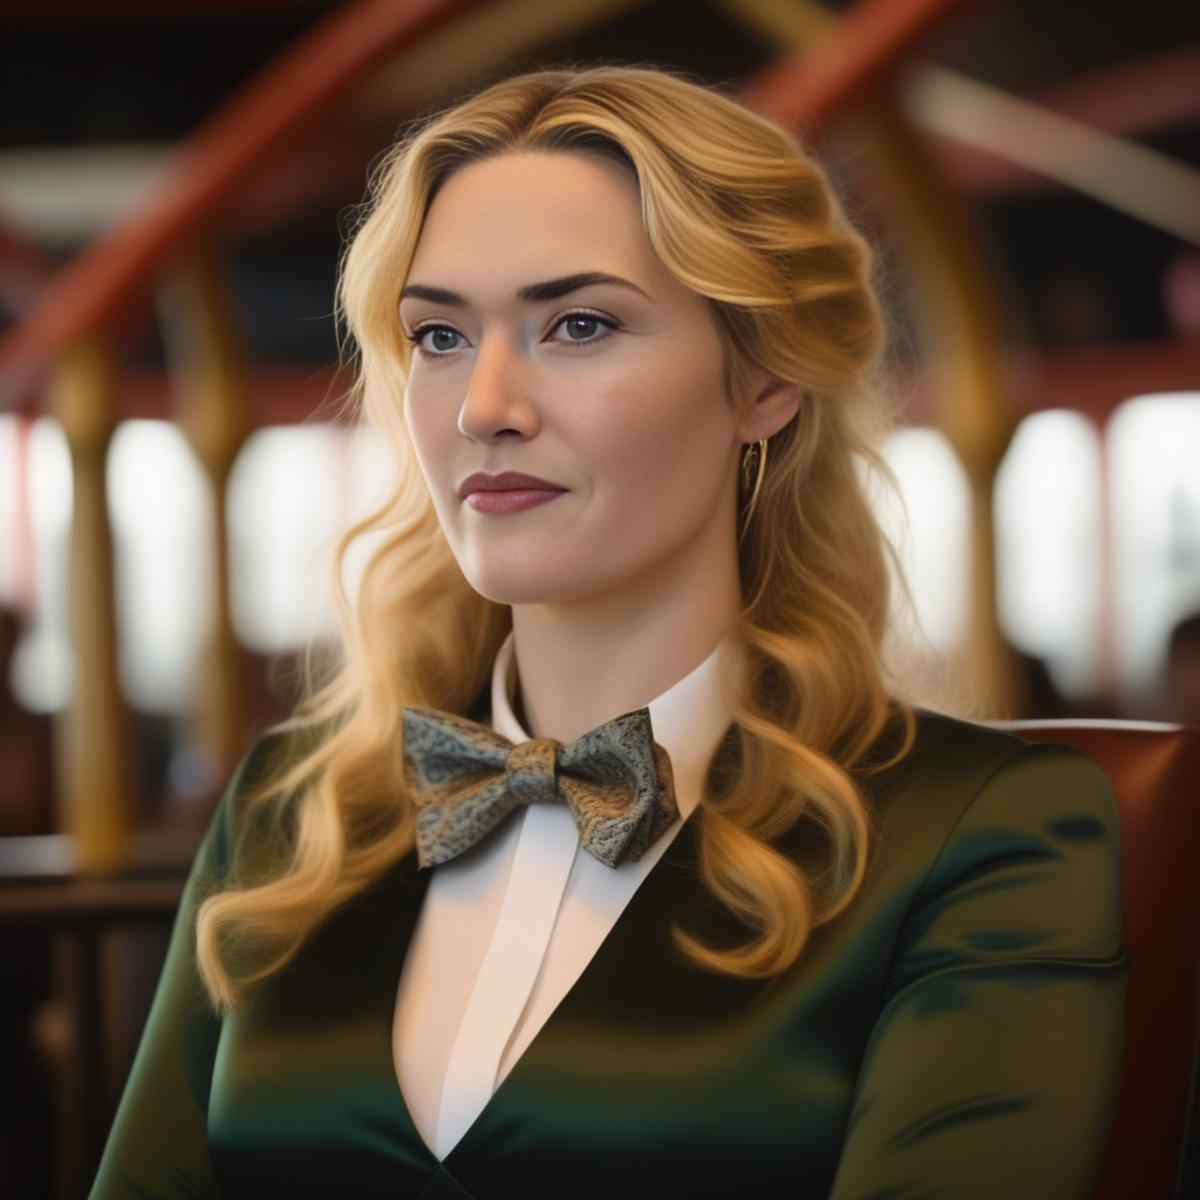 Kate Winslet image by parar20